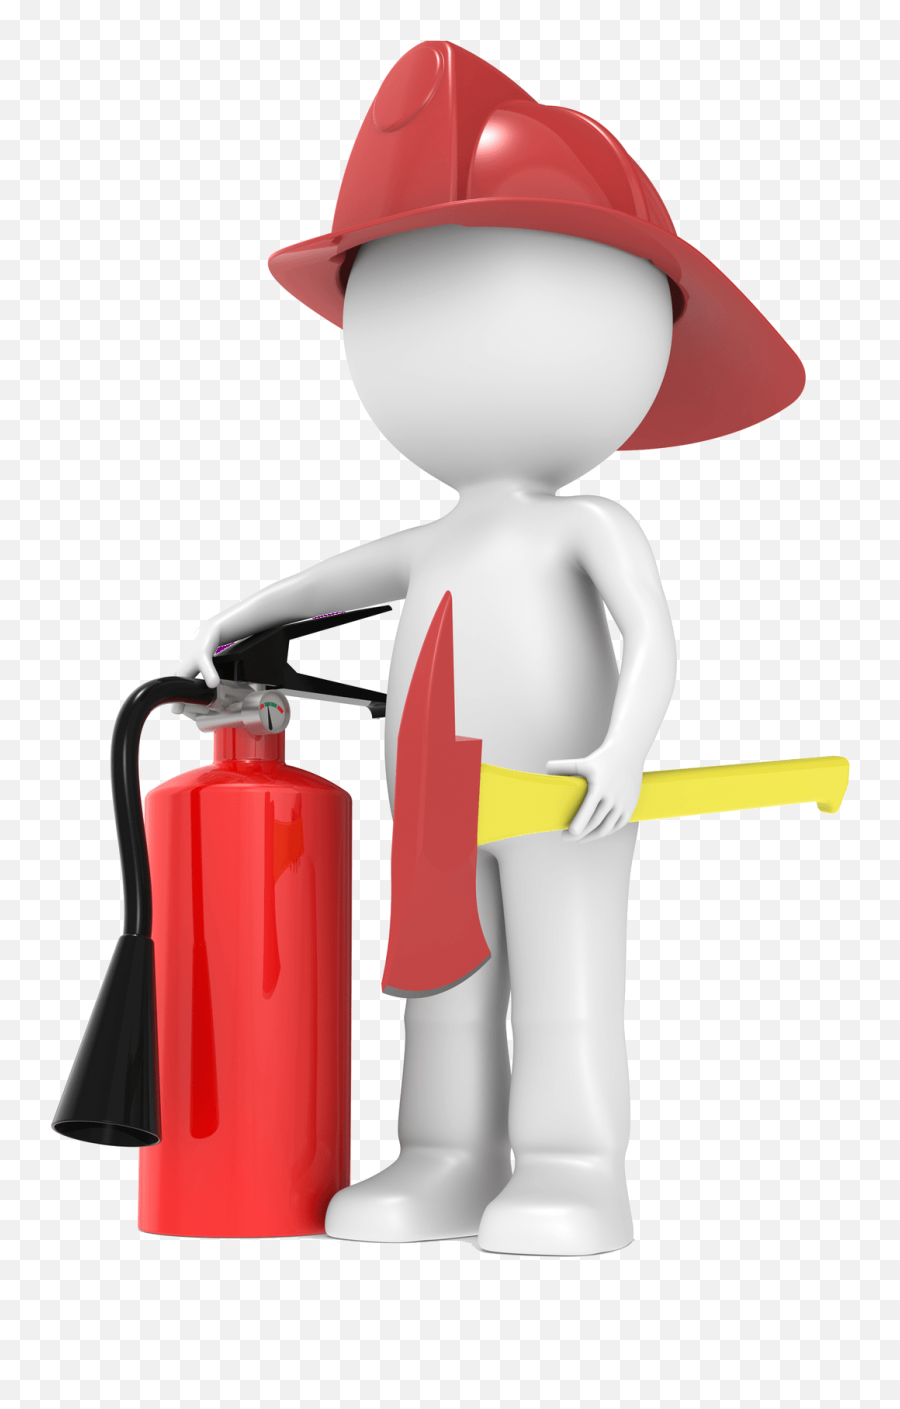 Fire Protection Equipment Anchorage Ak - Gmw Fire Protection Emoji,Fire Extinguisher Logo